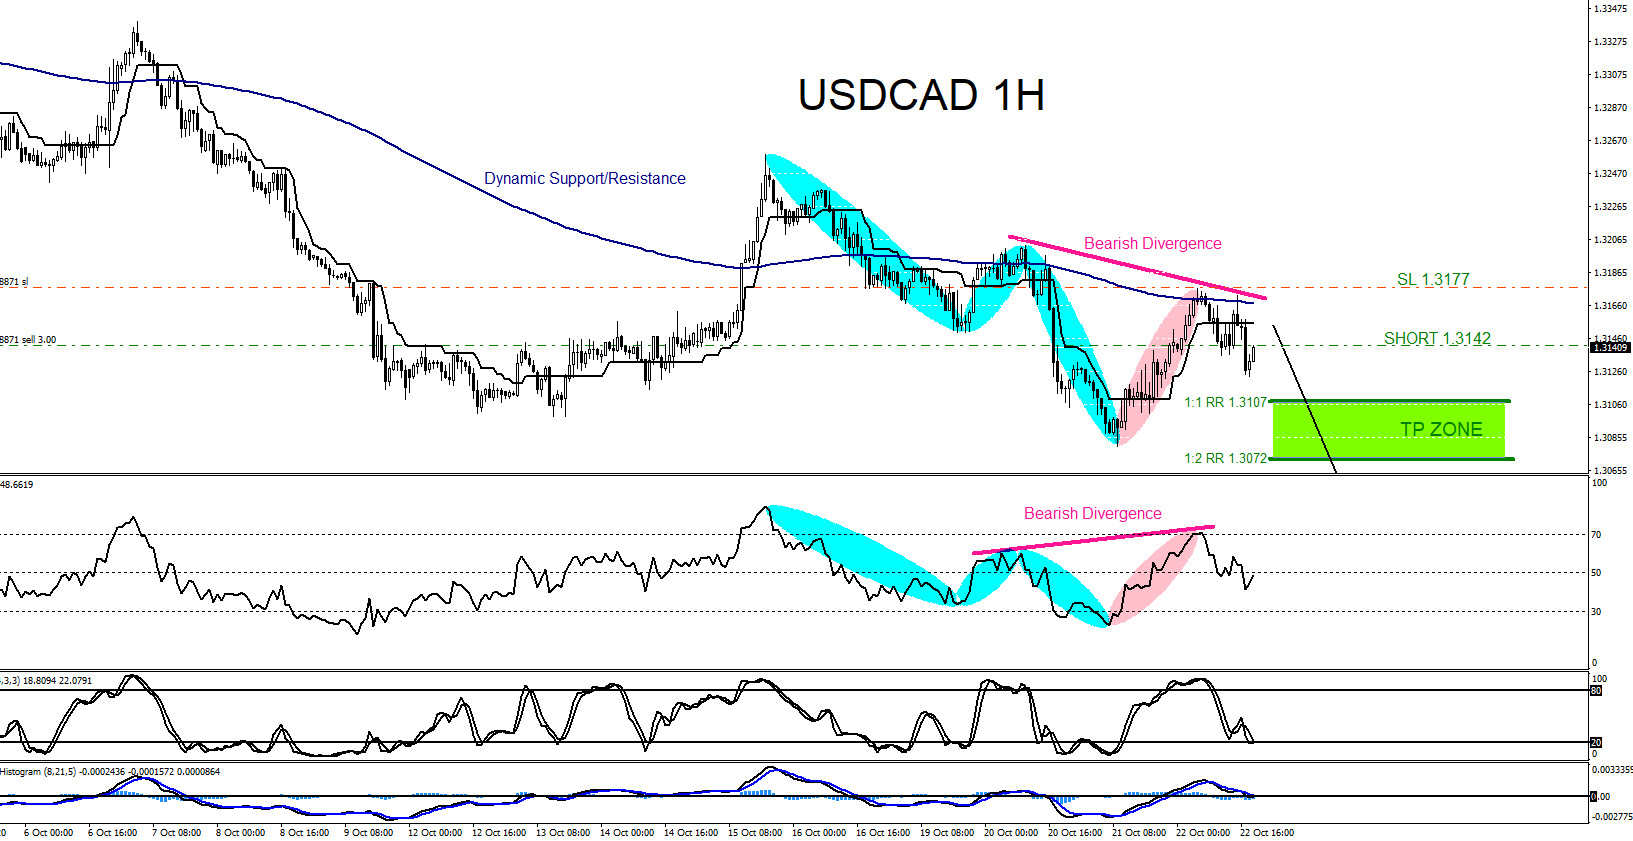 USDCAD : Will the Pair Extend Lower?